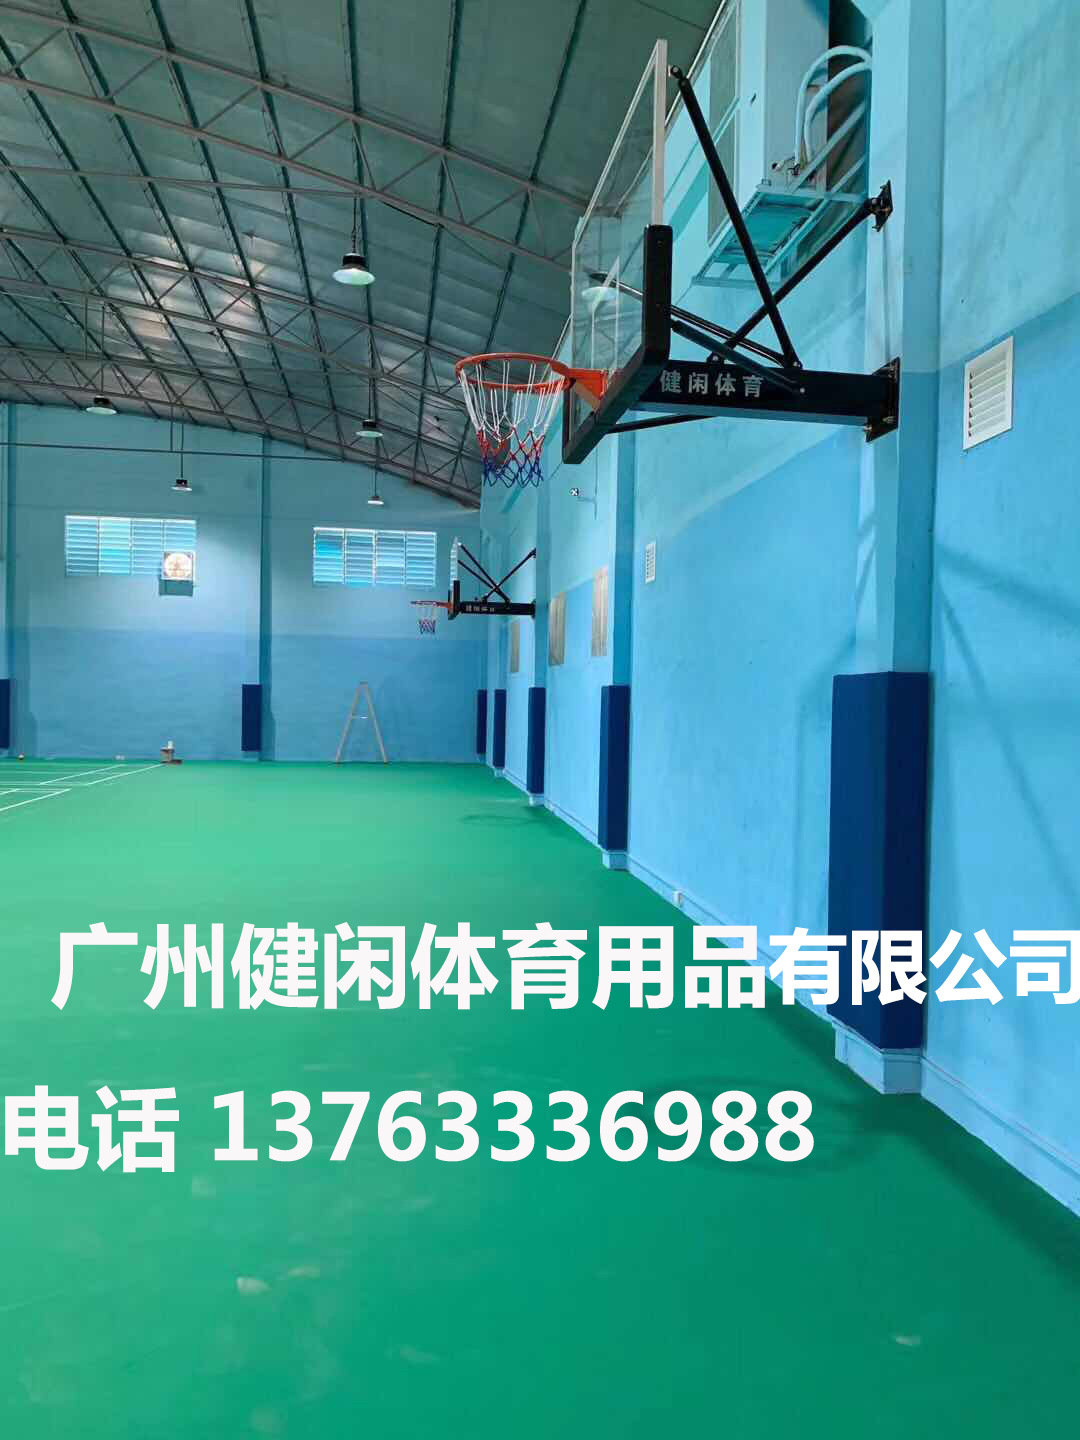 customized School Playground The lamp post basketball stands Public occasion smart cover fire control The Conduit Anti collision software Protective pads